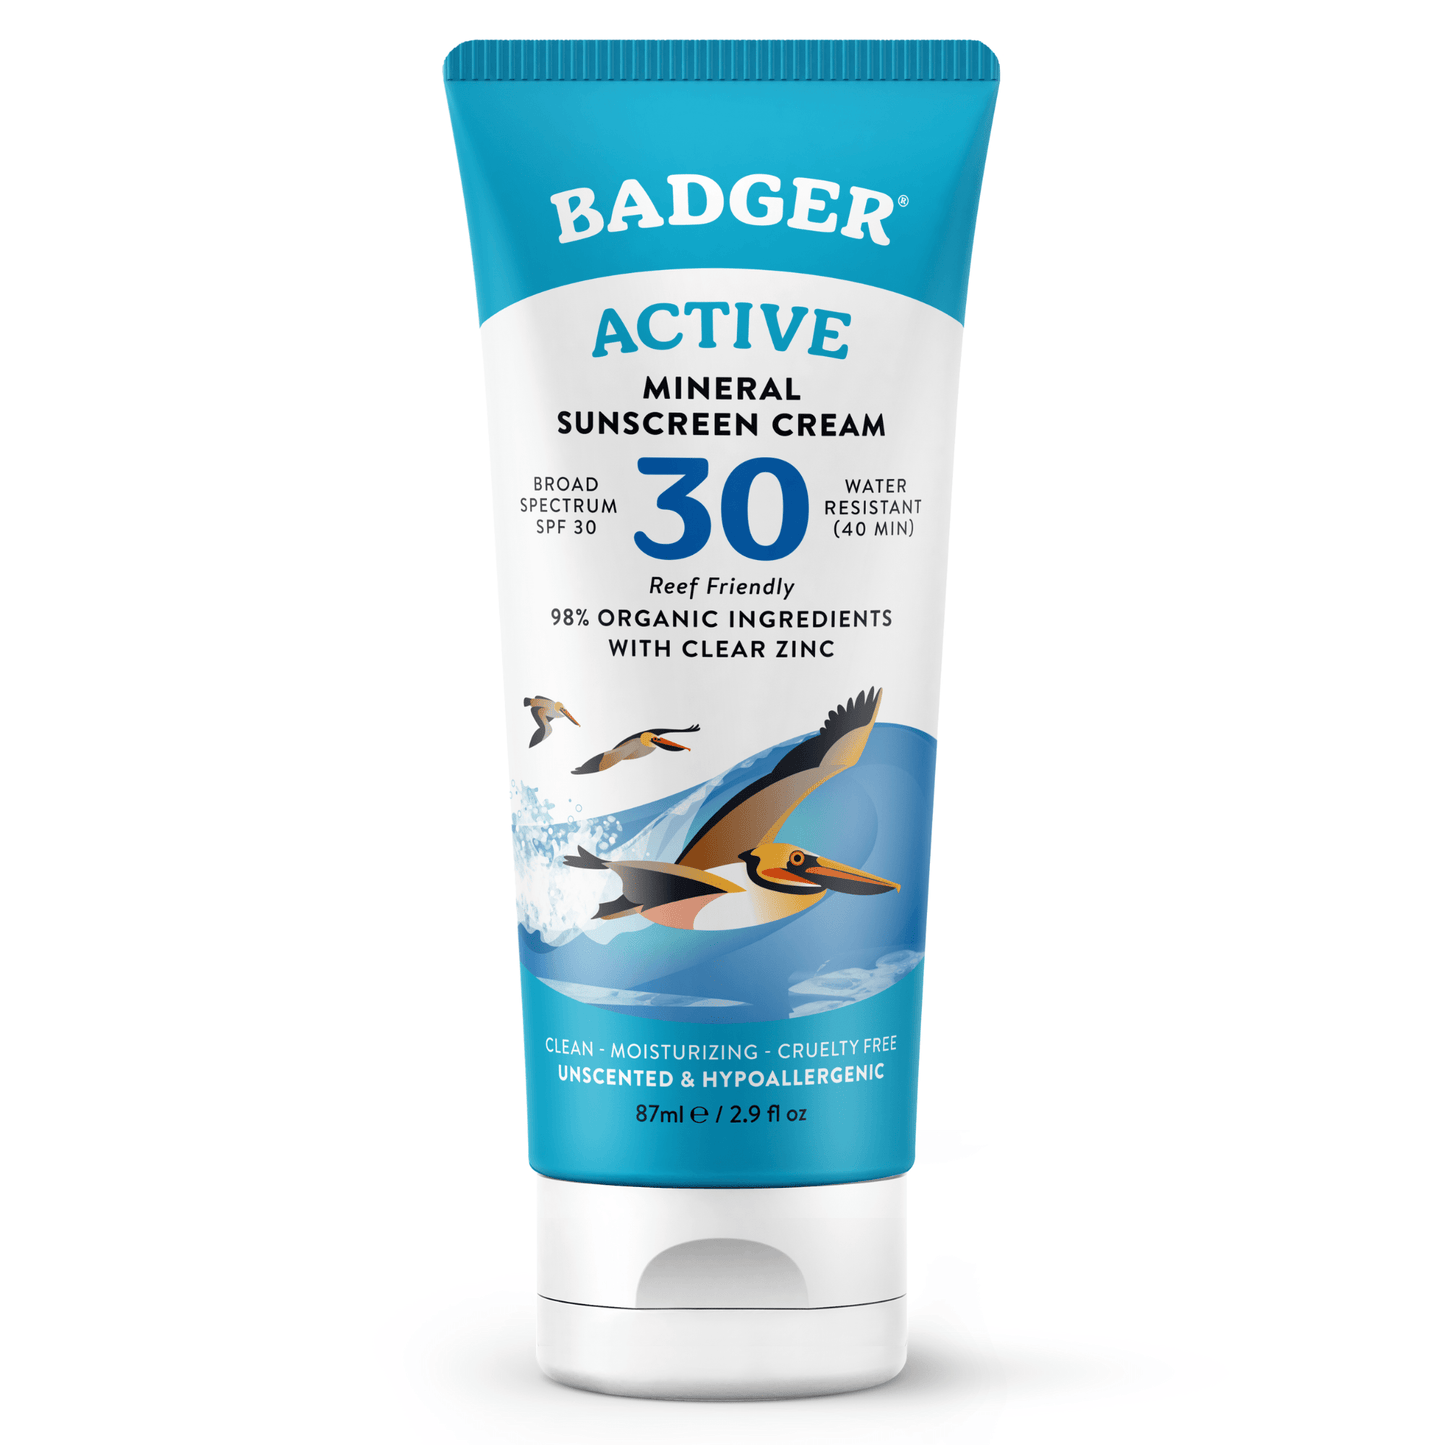 Primary Image of Active Mineral Sunscreen Cream SPF 30